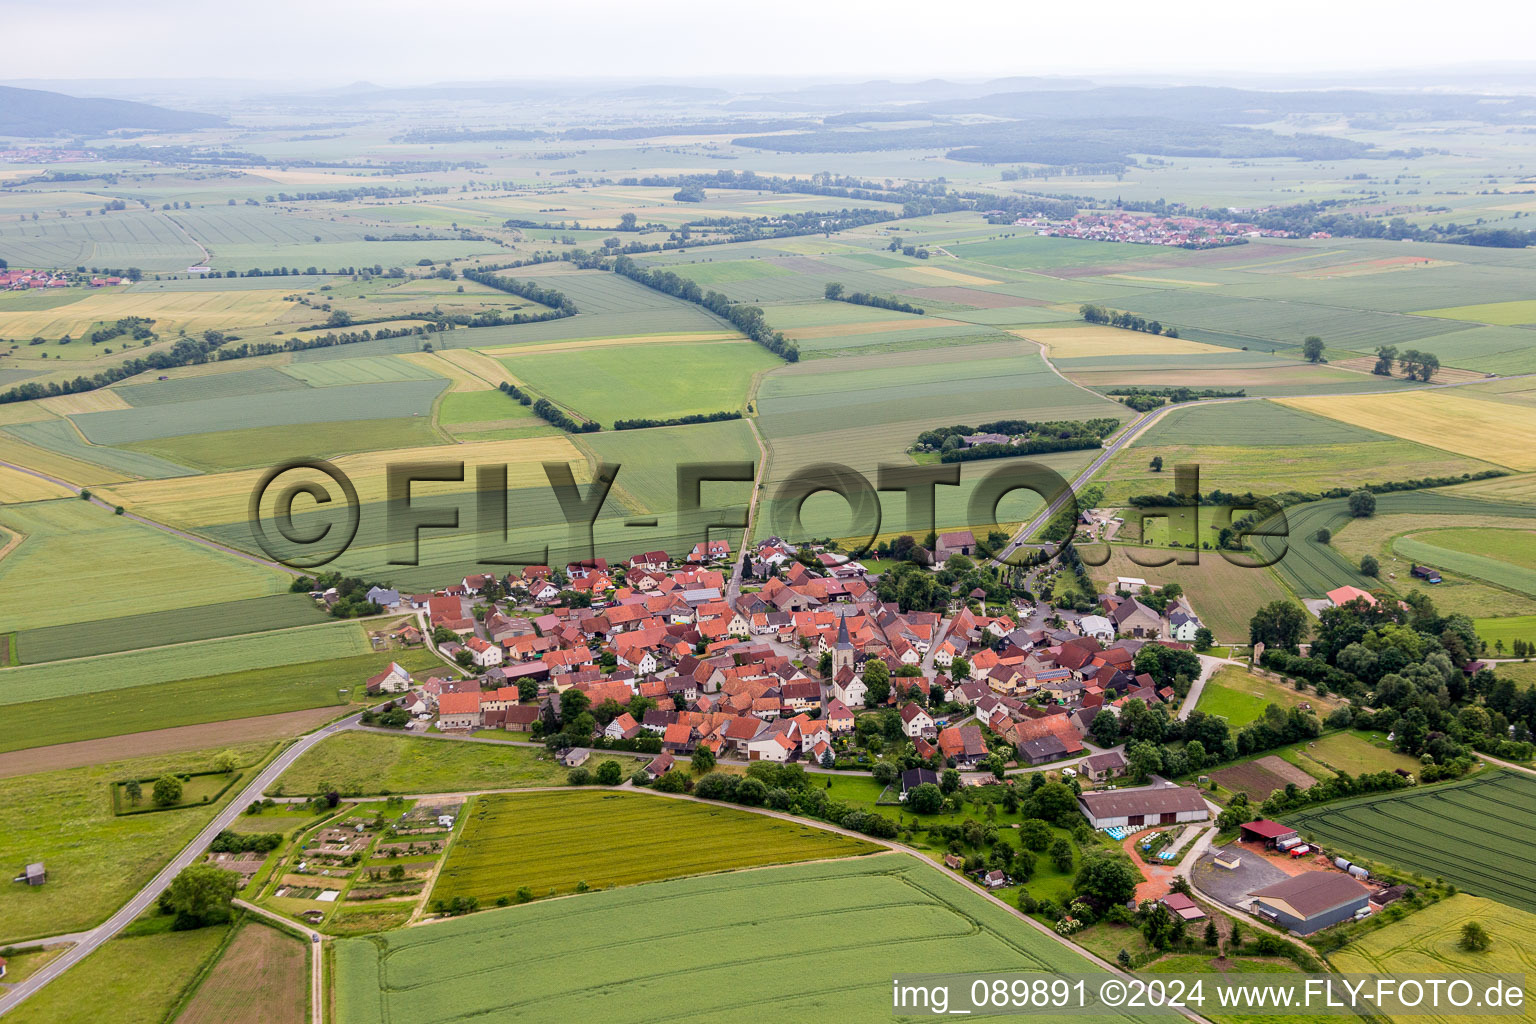 Aerial photograpy of Village - view on the edge of agricultural fields and farmland in the district Rothausen in Hoechheim in the state Bavaria, Germany